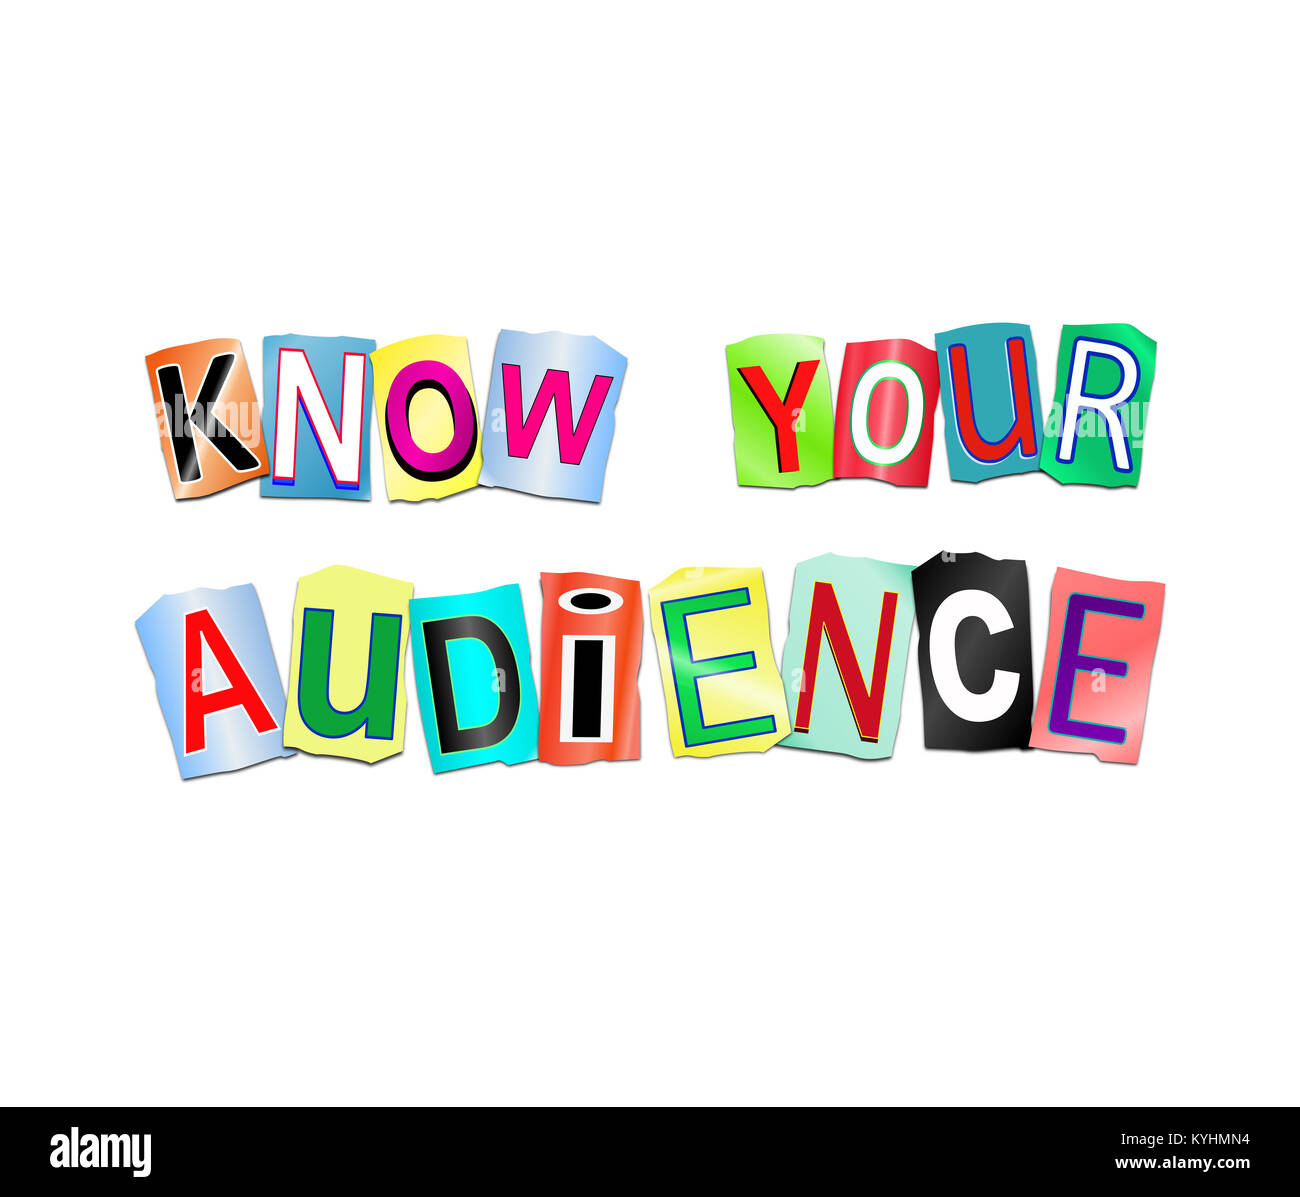 3d Illustration depicting a set of cut out printed letters arranged to form the words know your audience. Stock Photo